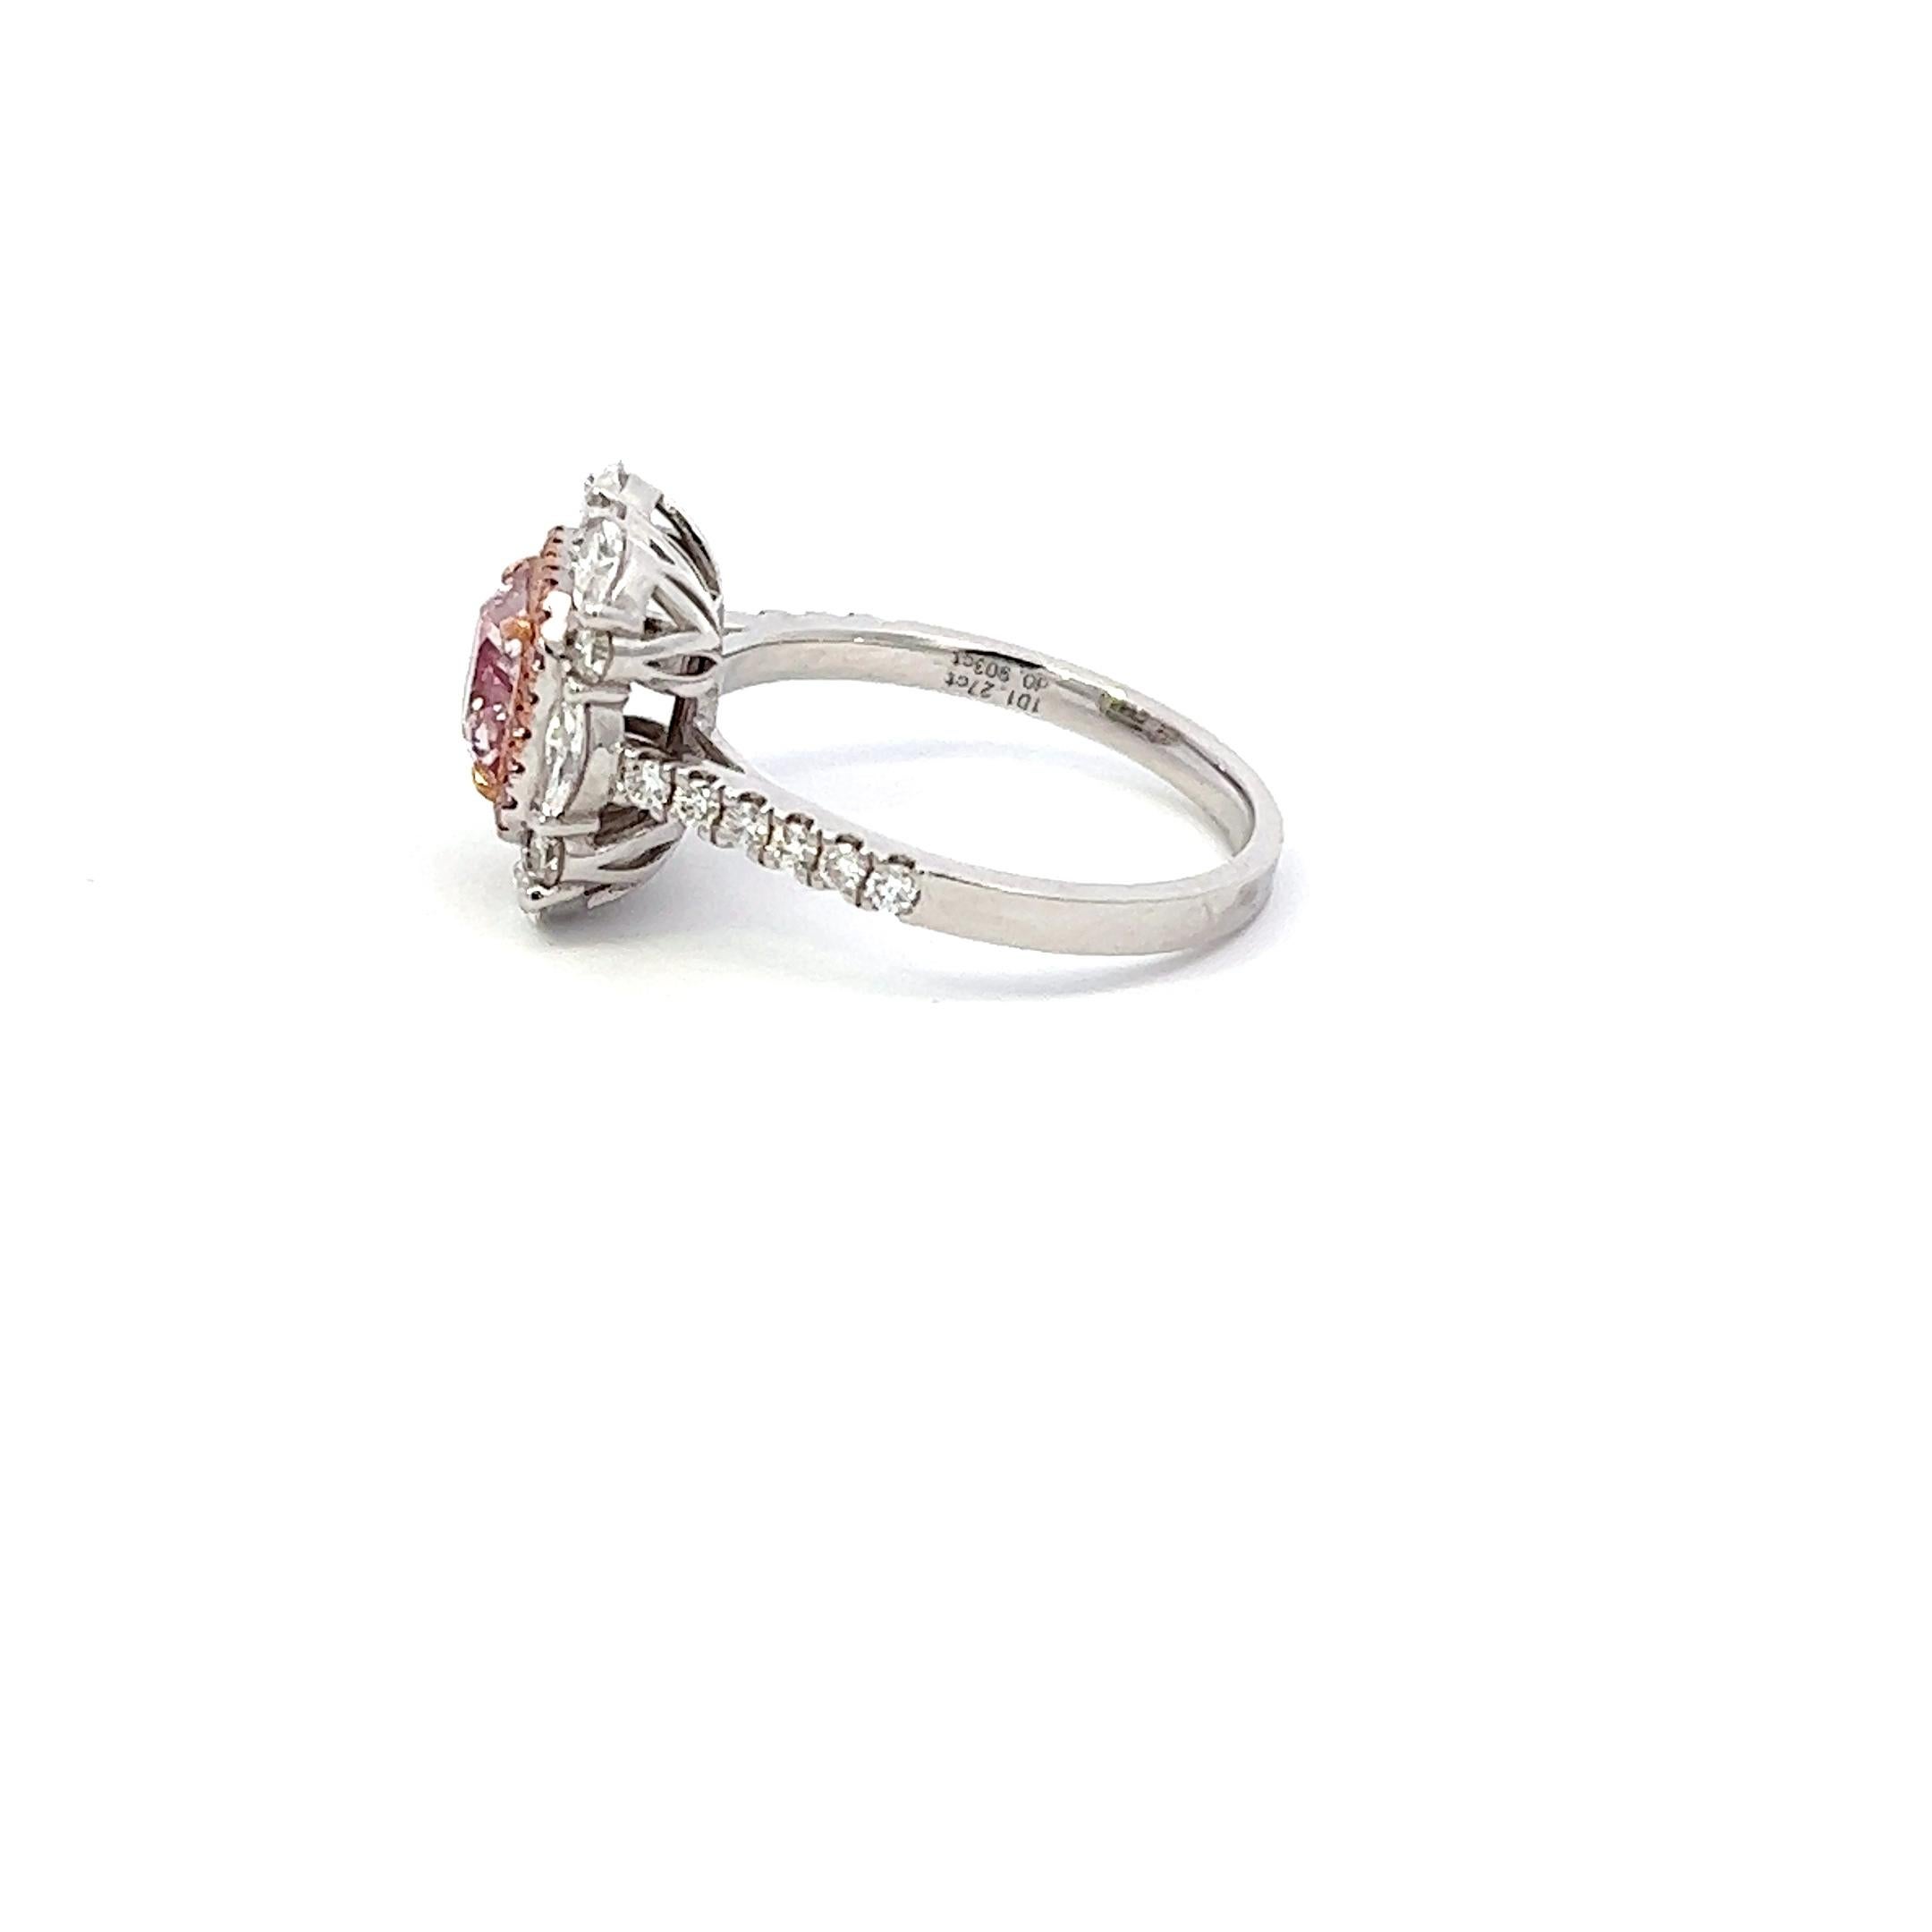 GIA Certified 1.27 Carat Pink Diamond Ring In New Condition For Sale In Los Angeles, CA